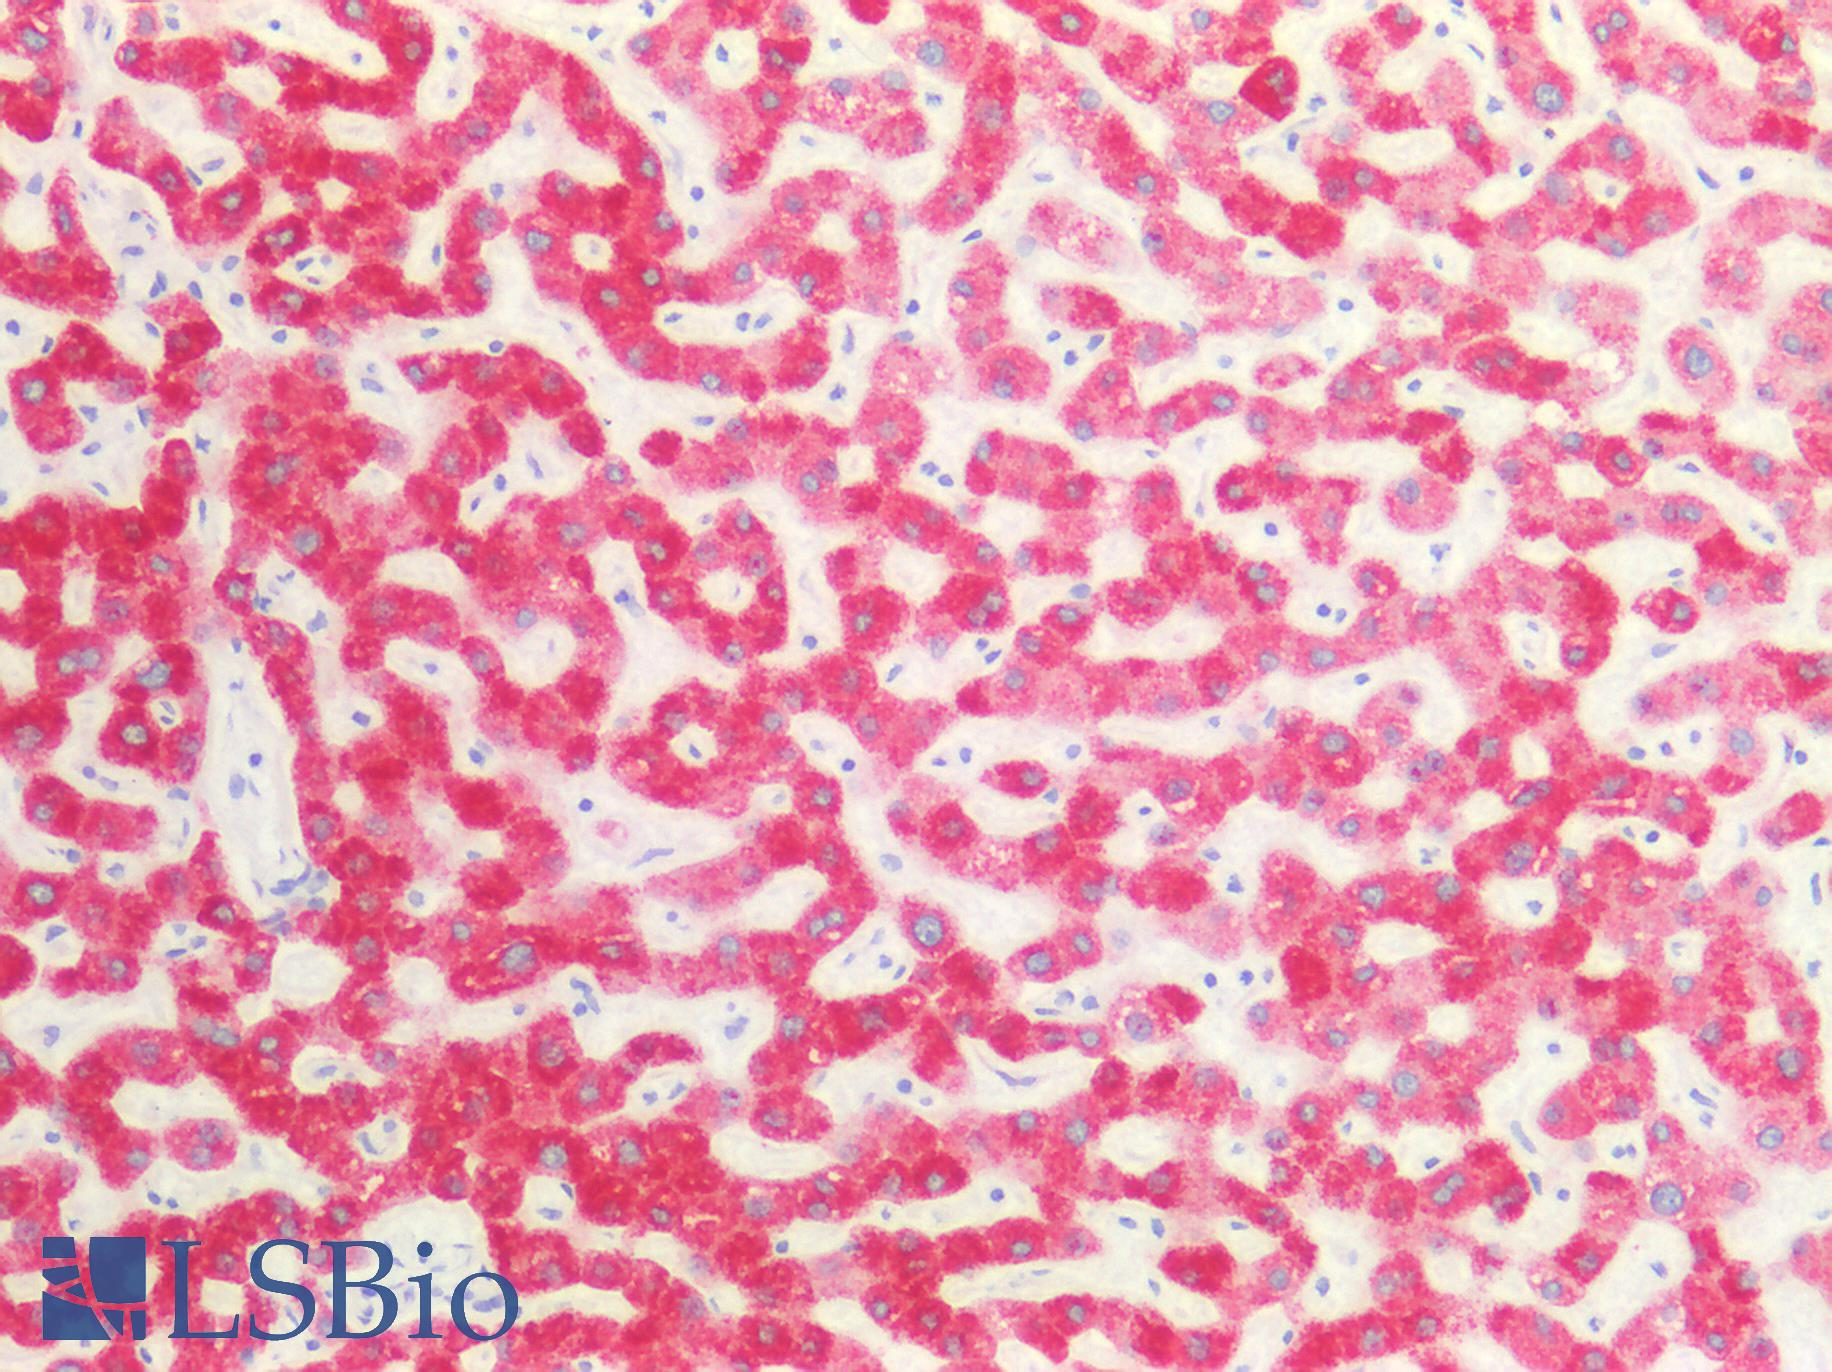 CANX / Calnexin Antibody - Human Liver: Formalin-Fixed, Paraffin-Embedded (FFPE)